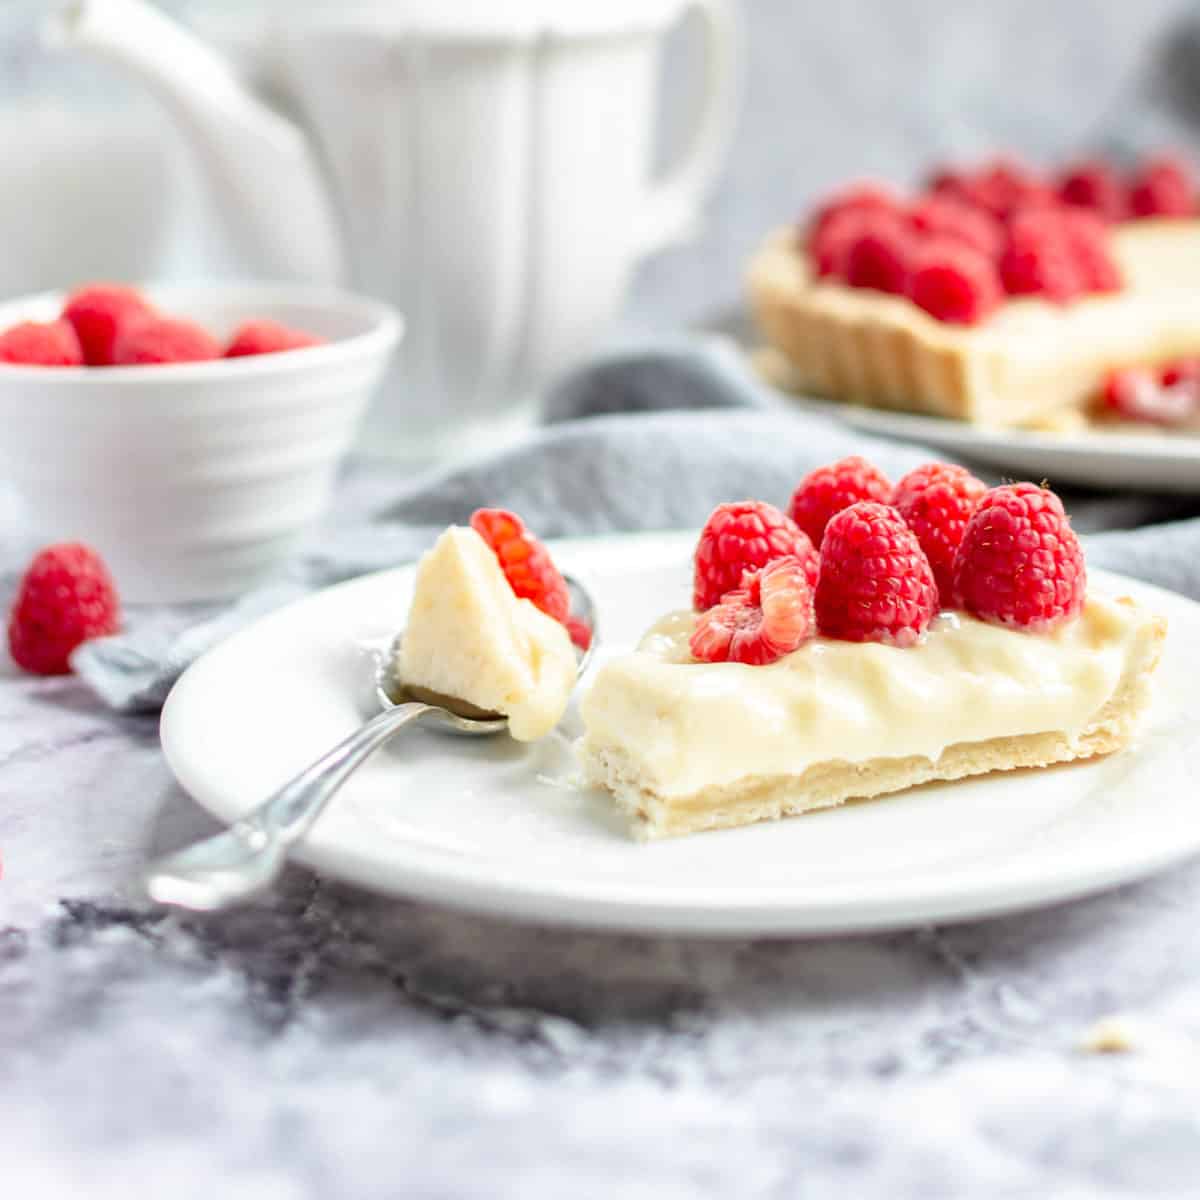 A slice of custard tart on a plate with a spoon and fresh raspberries.